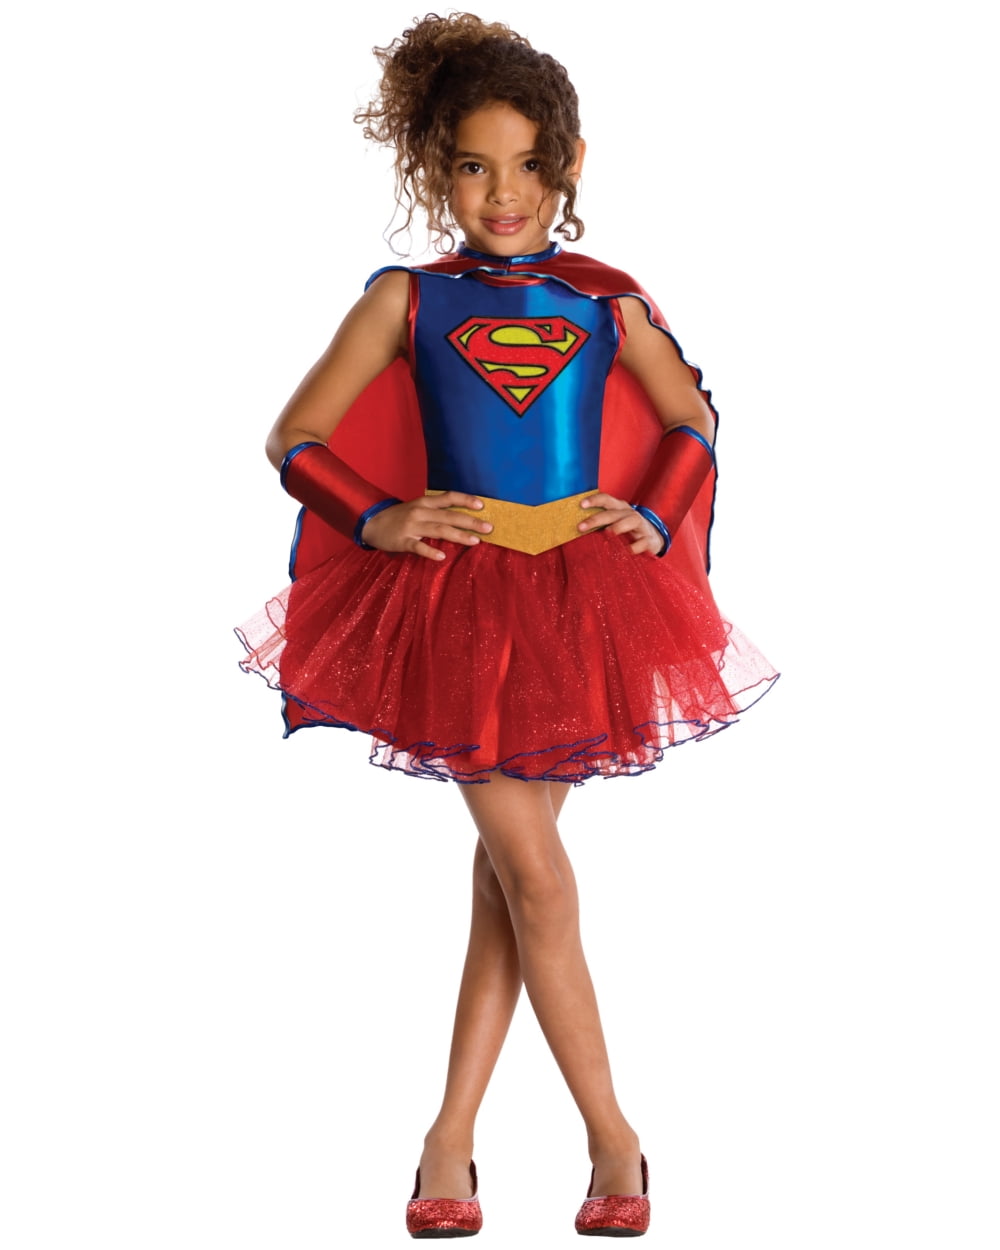 Pink Supergirl Superman Kids Costume Girls Fancy Dress-Size 3-8 Free Boot Cover 